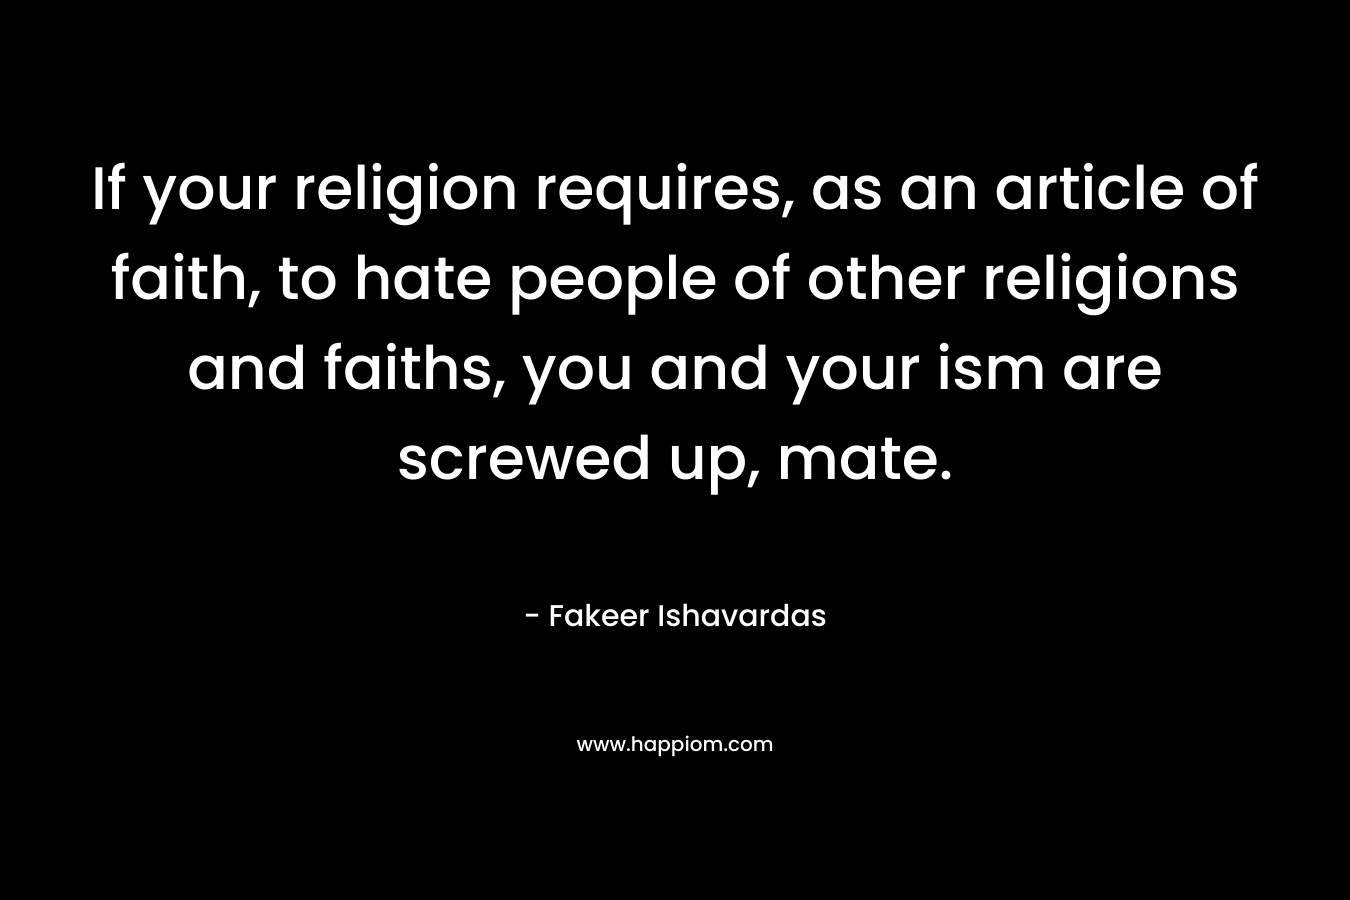 If your religion requires, as an article of faith, to hate people of other religions and faiths, you and your ism are screwed up, mate. – Fakeer Ishavardas